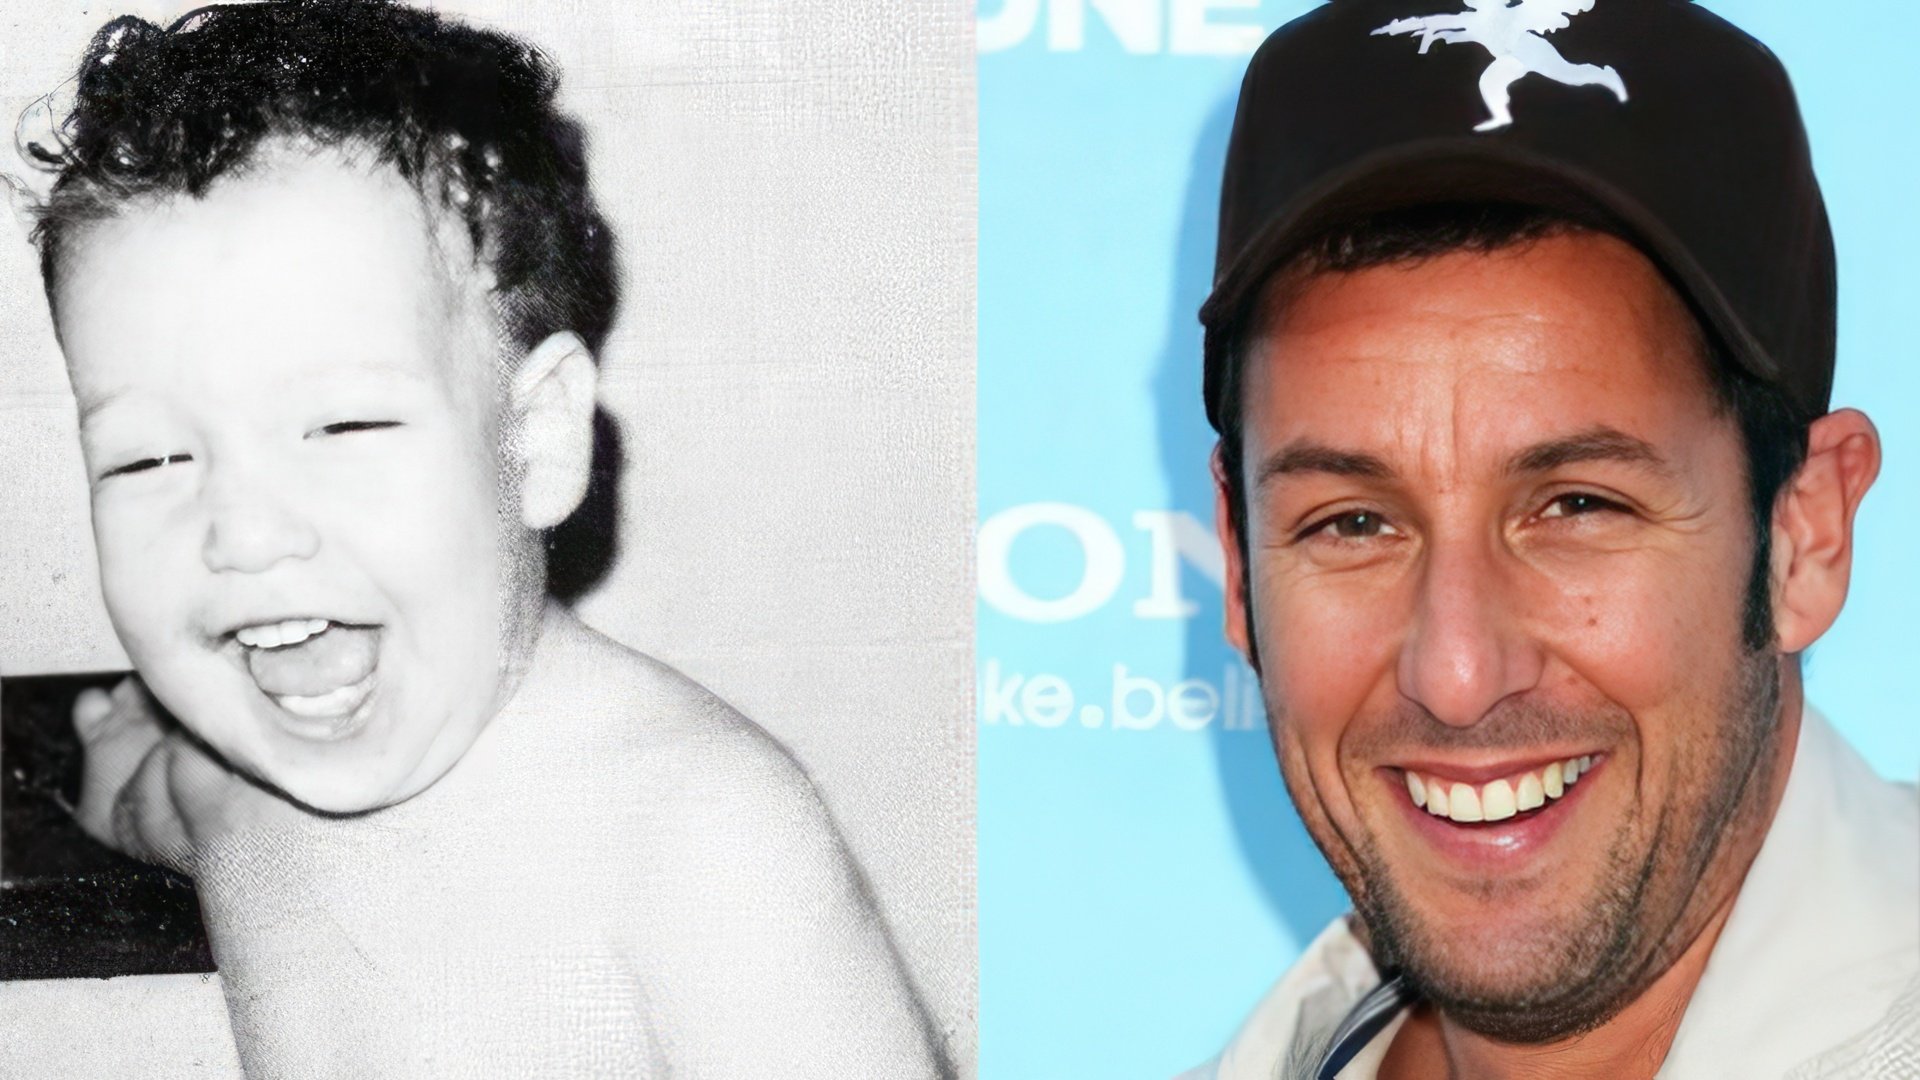 Adam Sandler in his childhood and nowadays